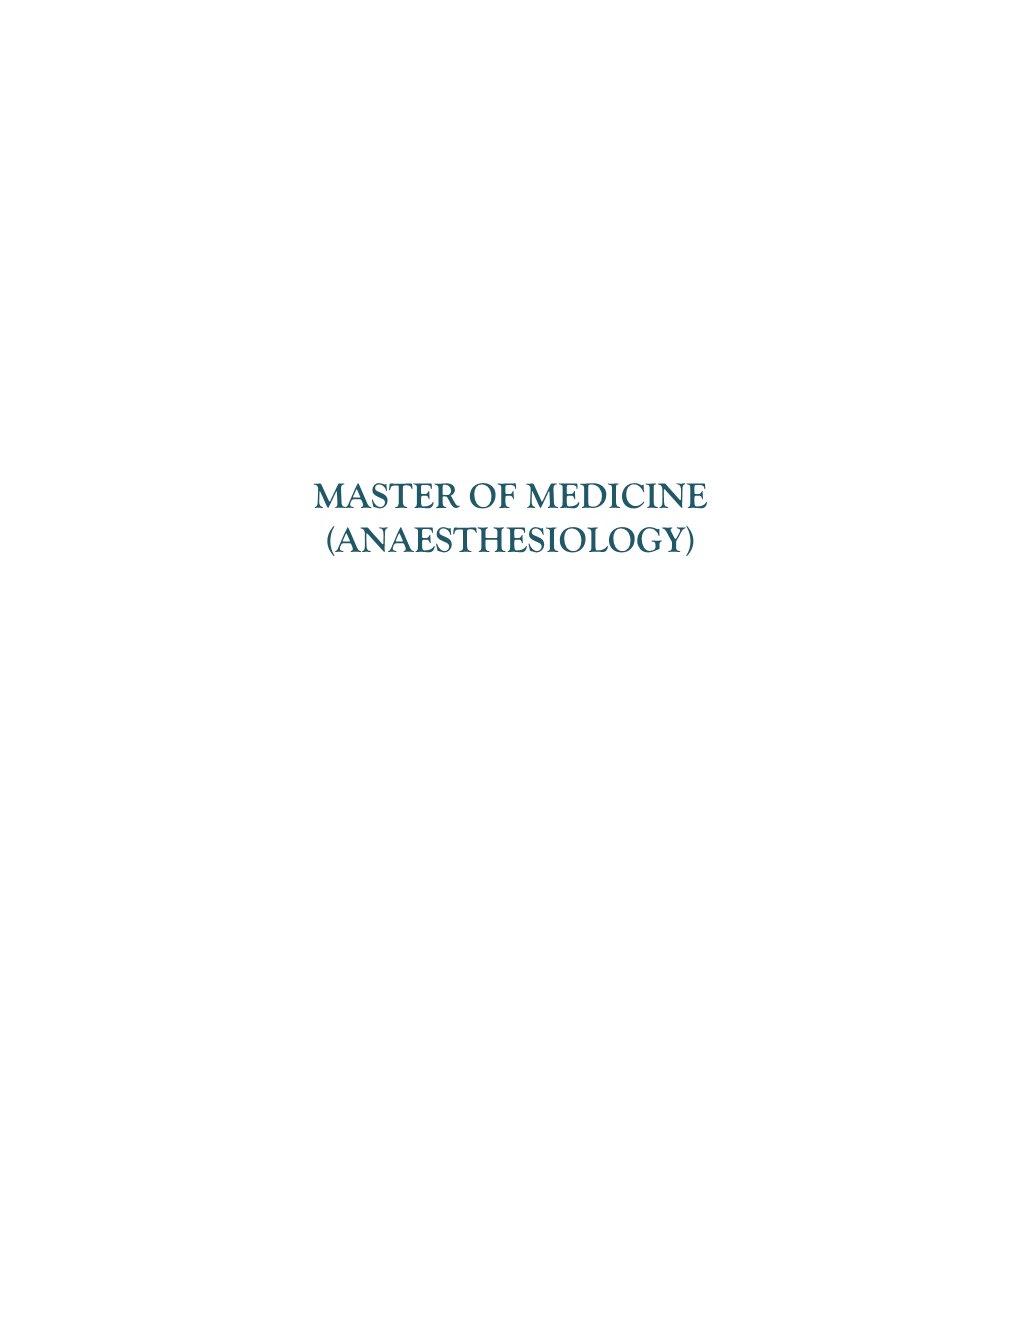 Master of Medicine (Anaesthesiology) Master of Medicine (Anaesthesiology)